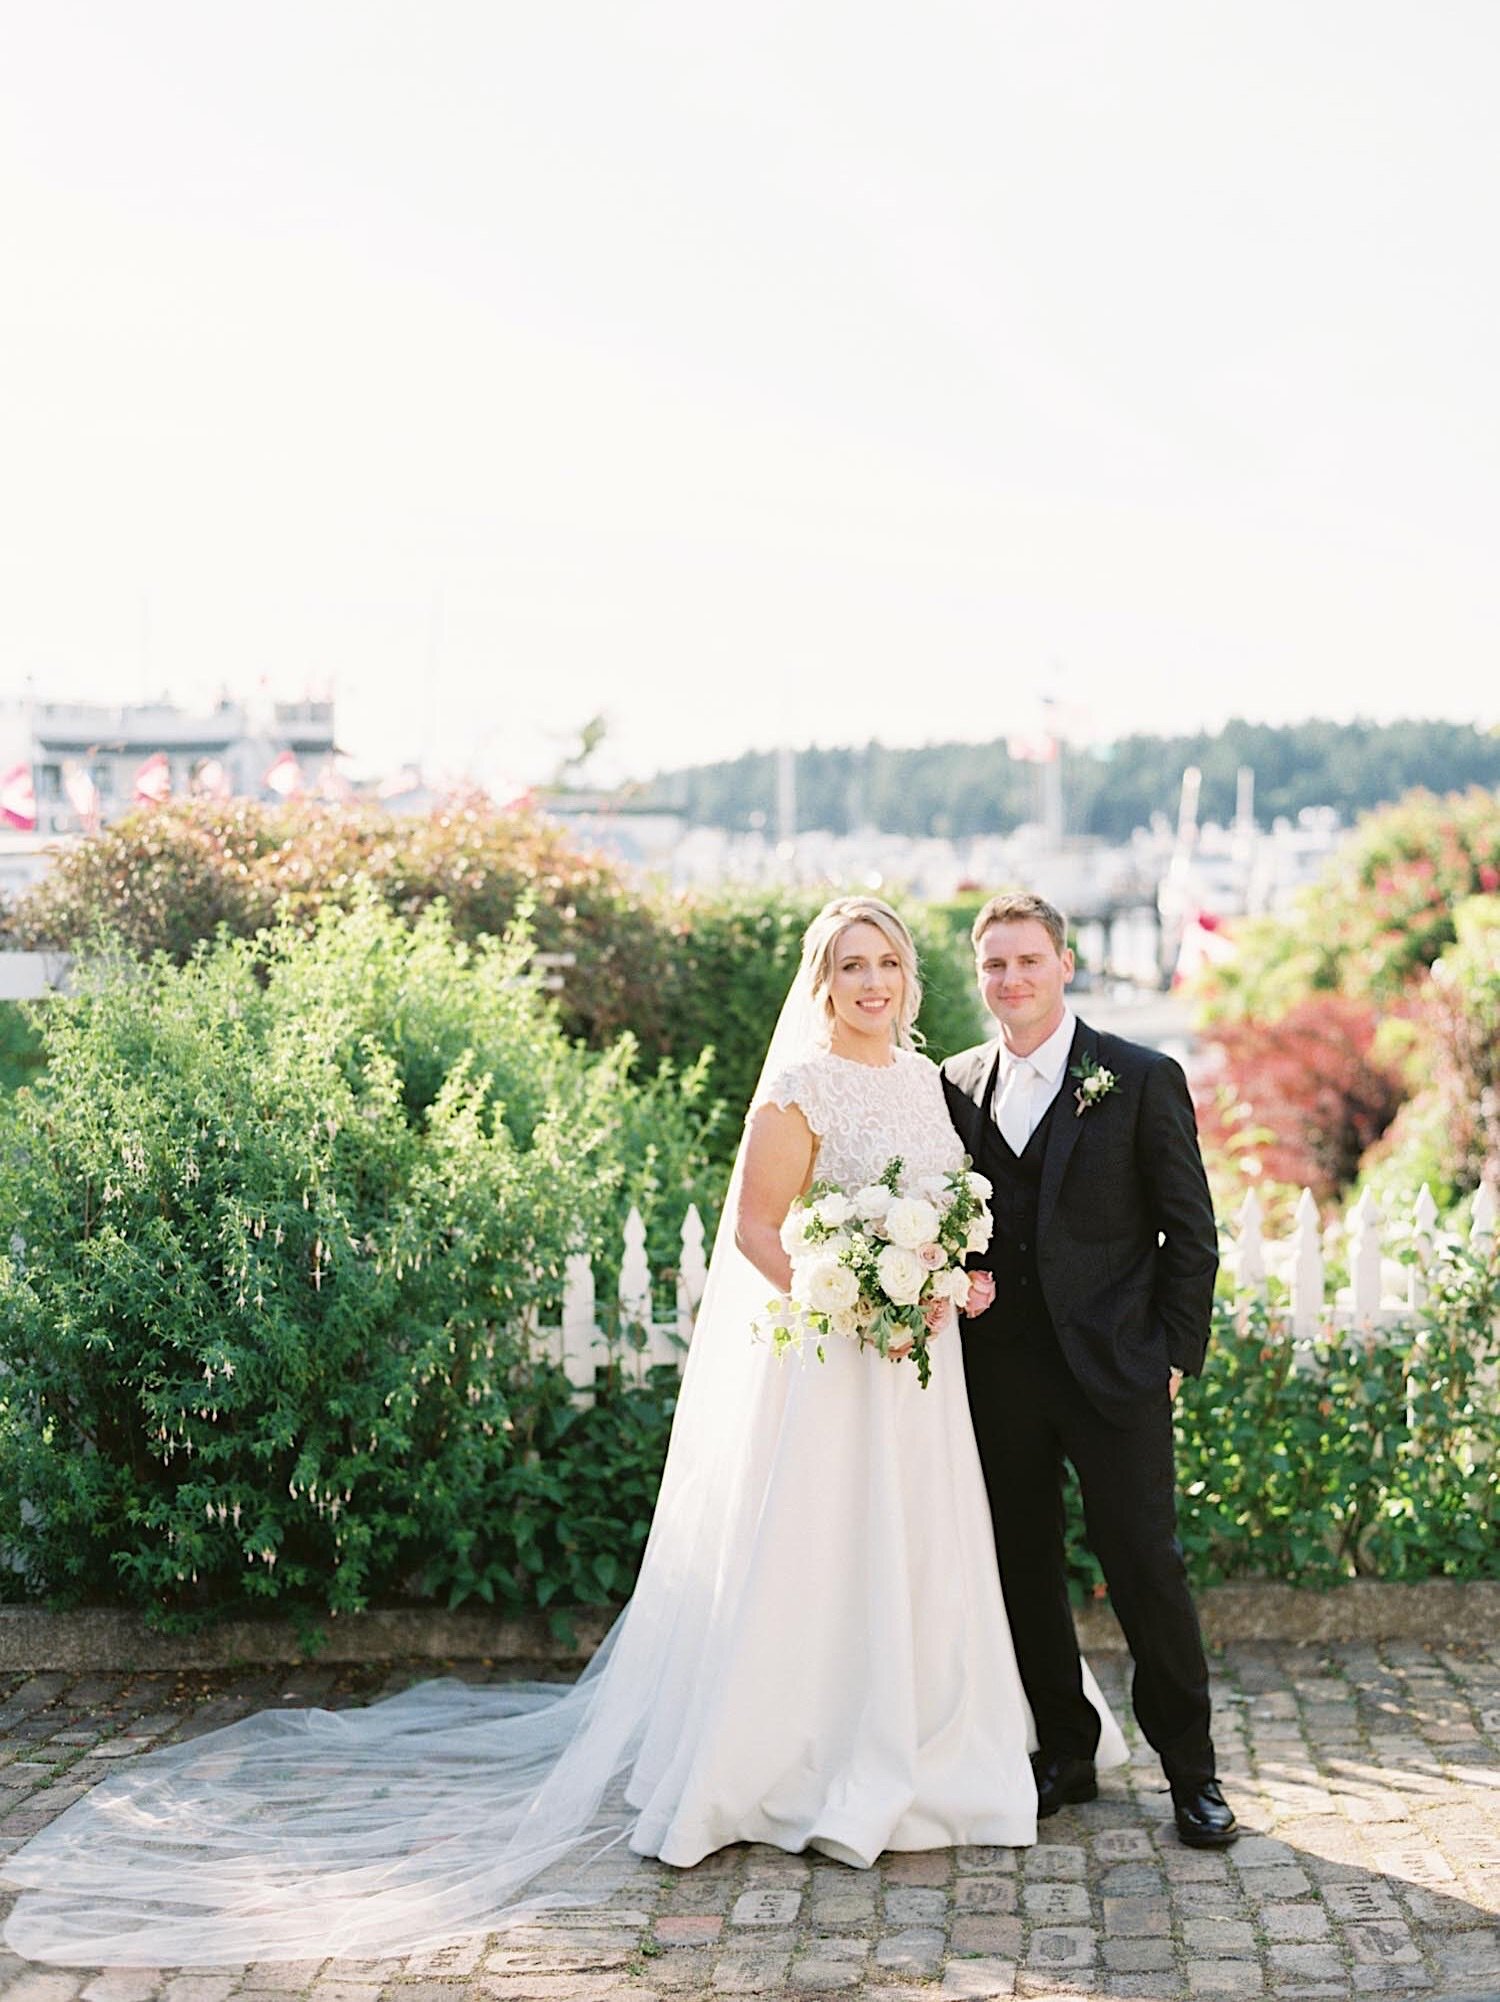 A classic wedding portrait in front of Roche Harbor in the San Juans